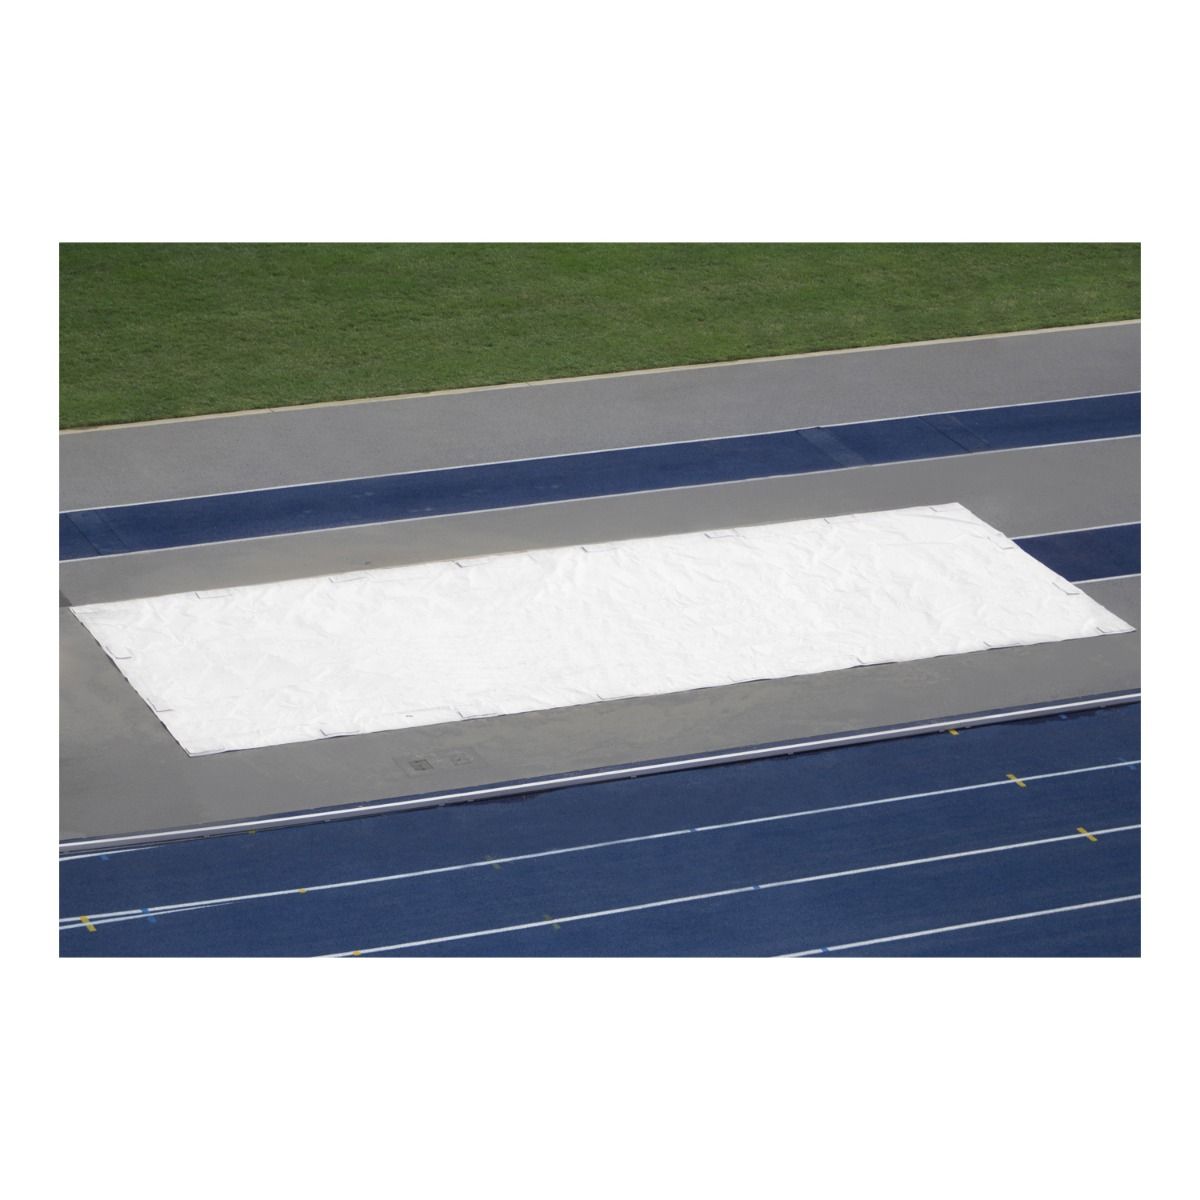 Gill Athletics Sand Pit Covers